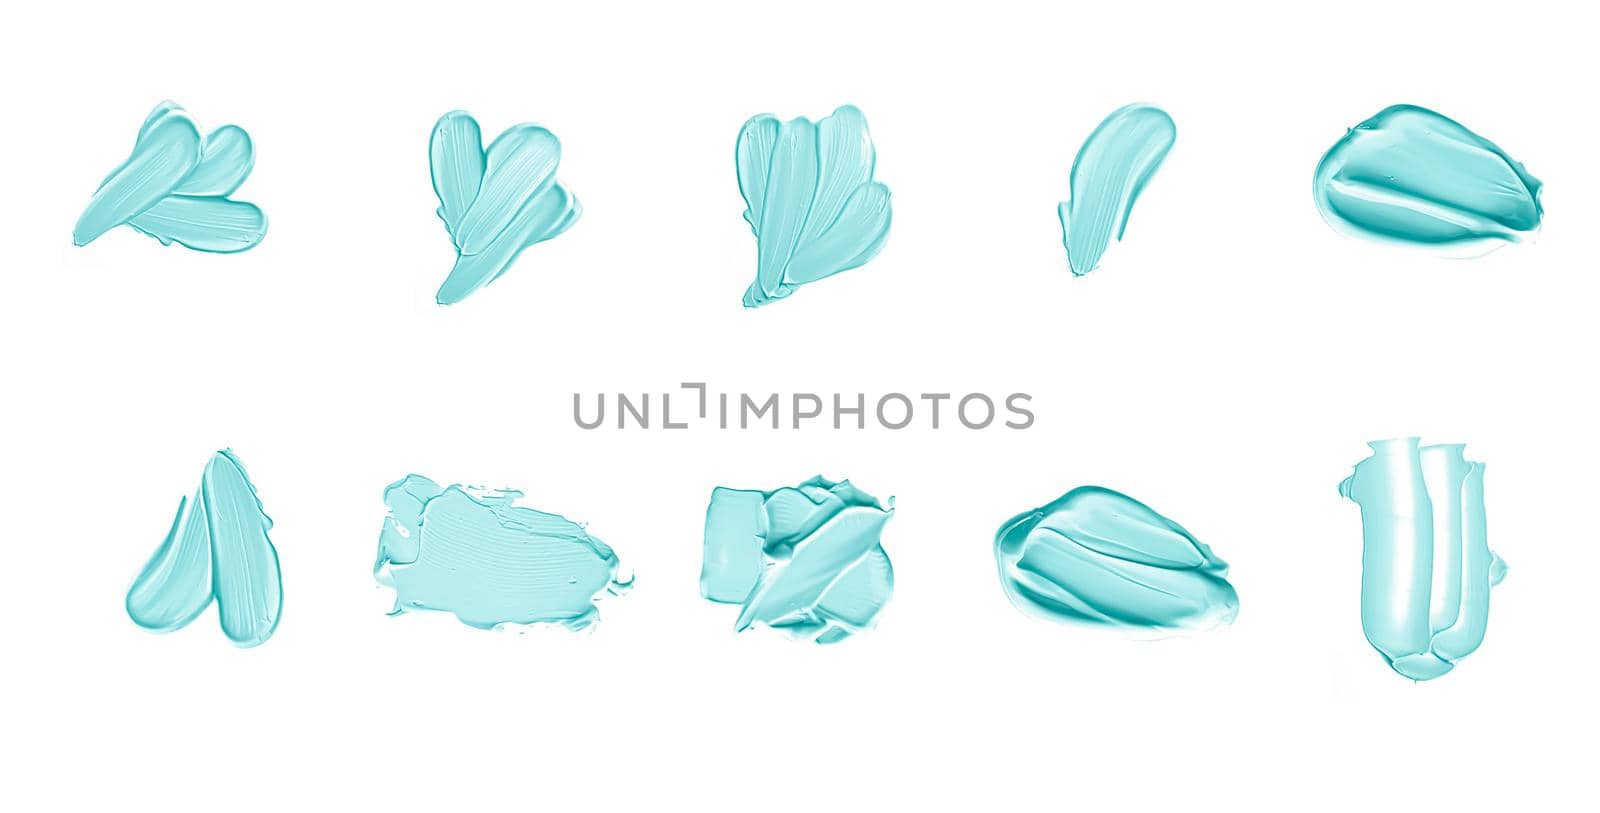 Pastel mint beauty swatches, skincare and makeup cosmetic product sample texture isolated on white background, make-up smudge, cream cosmetics smear or paint brush stroke closeup